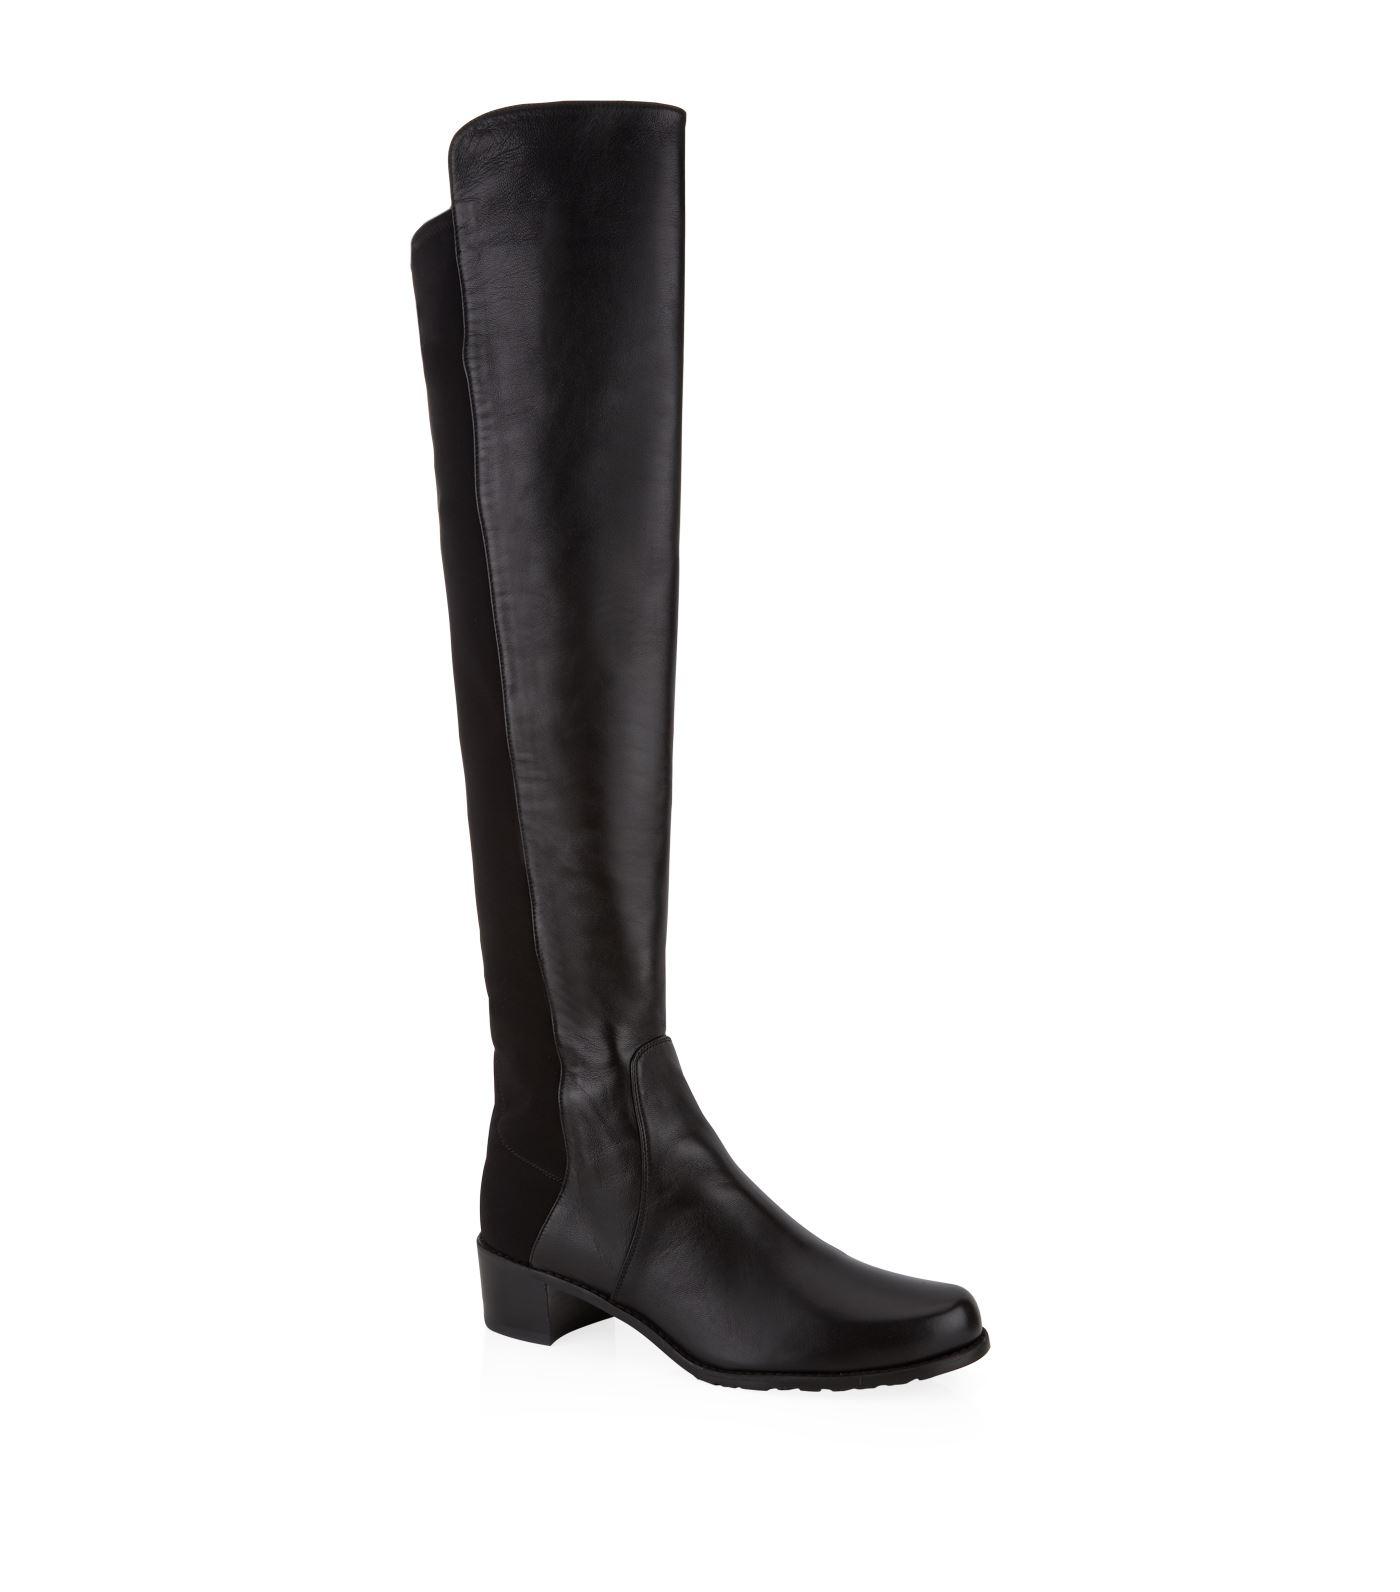 Stuart Weitzman Reserve Stretch-back Leather Boots in Black - Save 62% ...